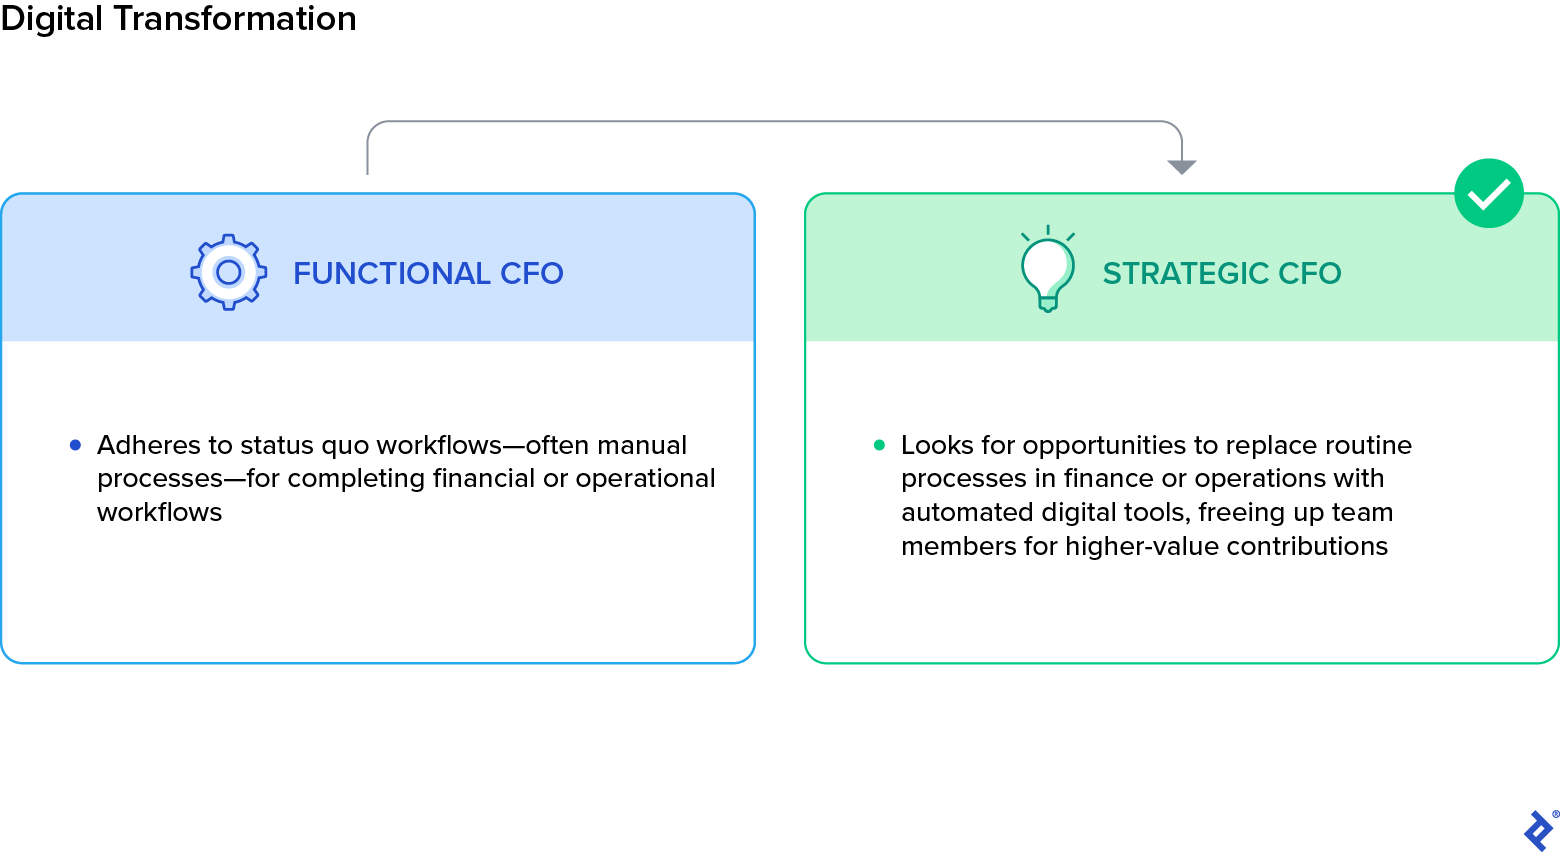 The functional CFO adheres to status quo workflows—often manual processes—for completing financial or operational workflows. The strategic CFO looks for opportunities to replace routine processes with automated digital tools.